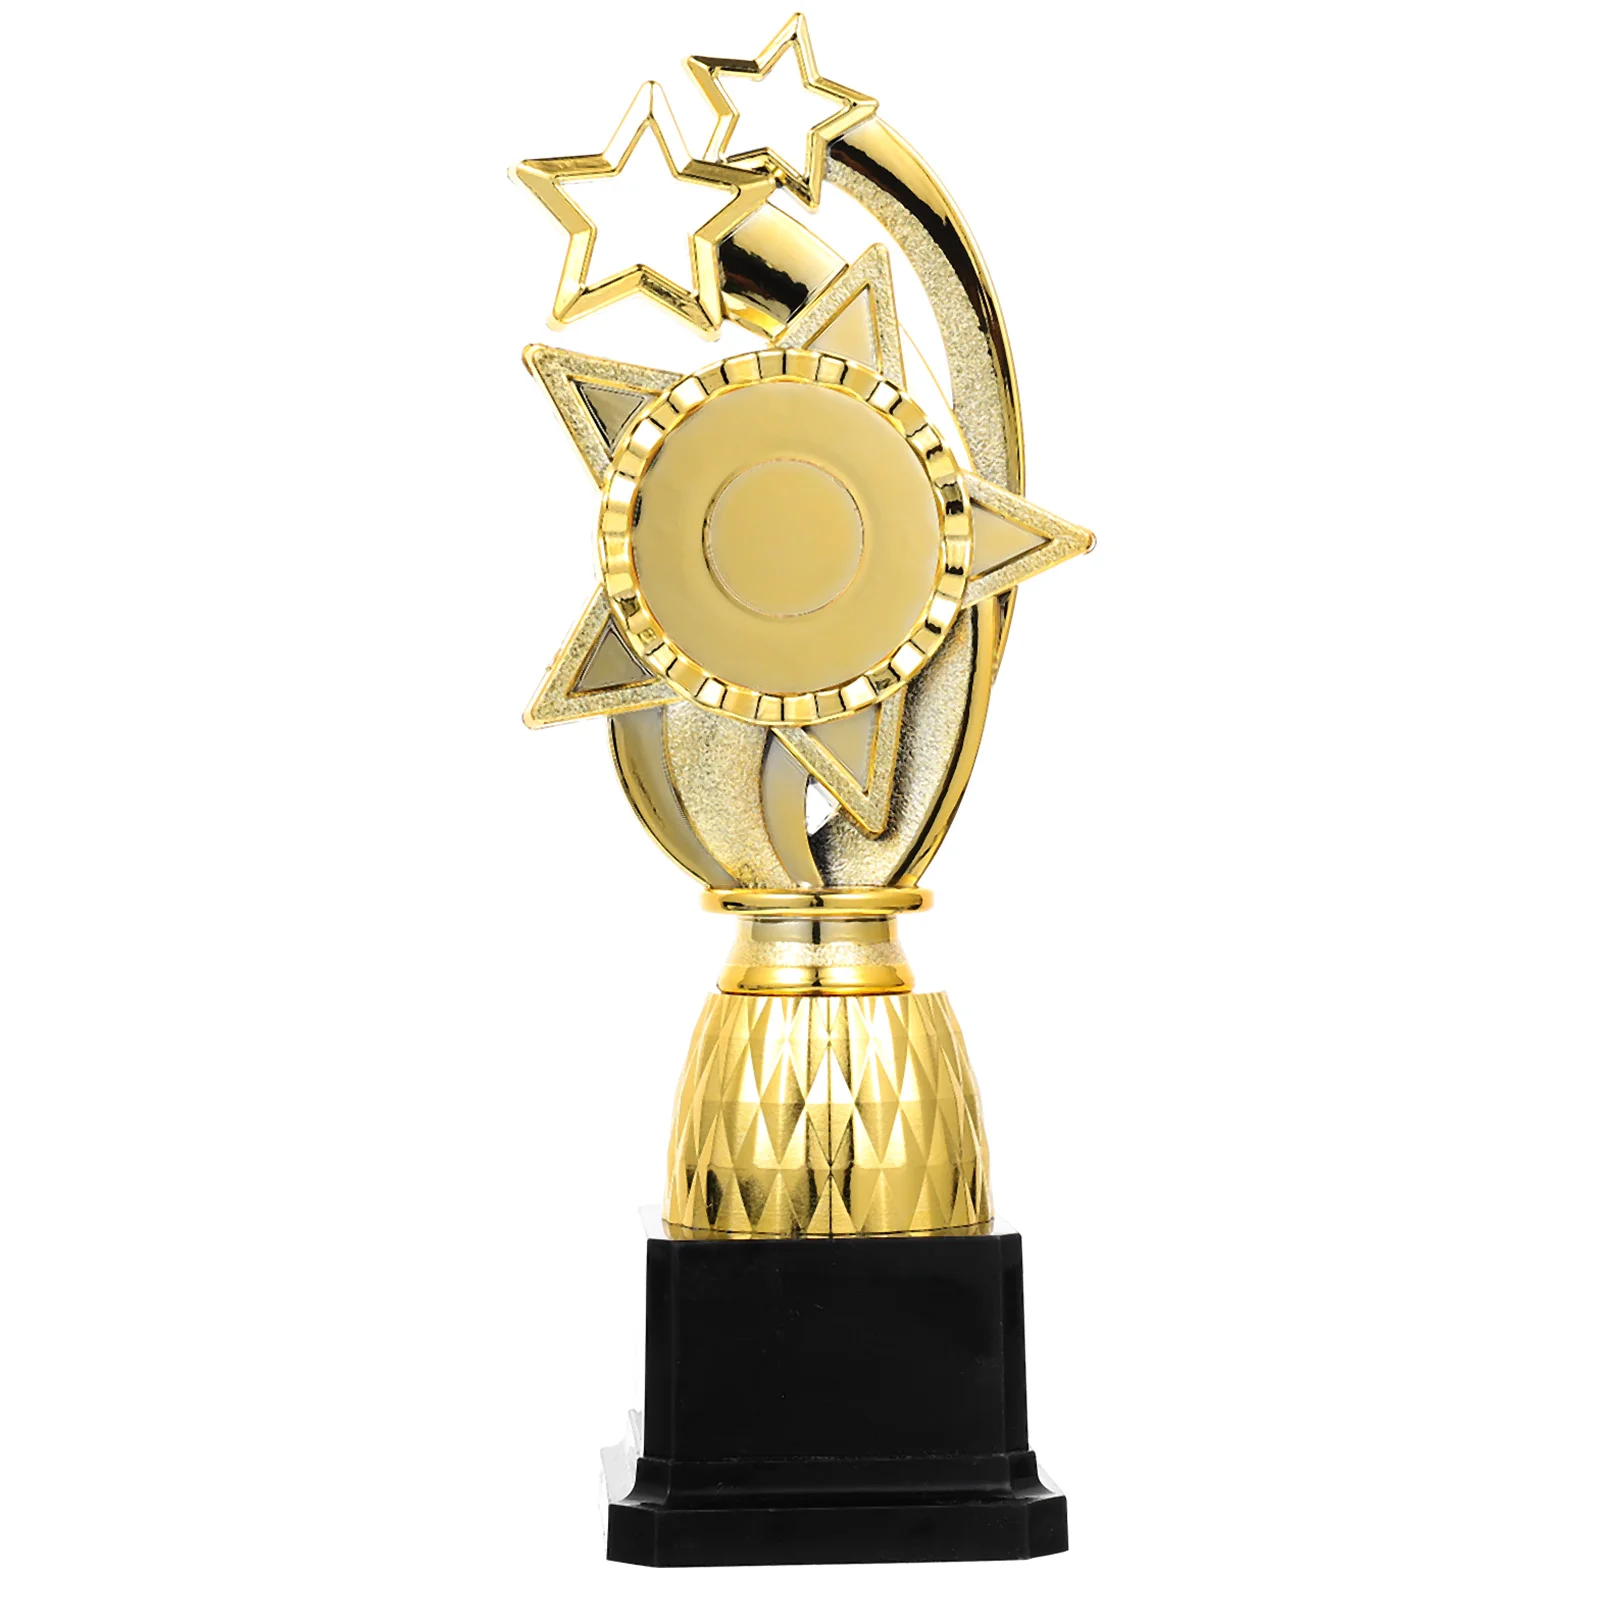 

Award Trophy Cups Trophies Party Favors for Award Ceremony Party Celebrations Corporate Events Competitions for Boys Kids Adults